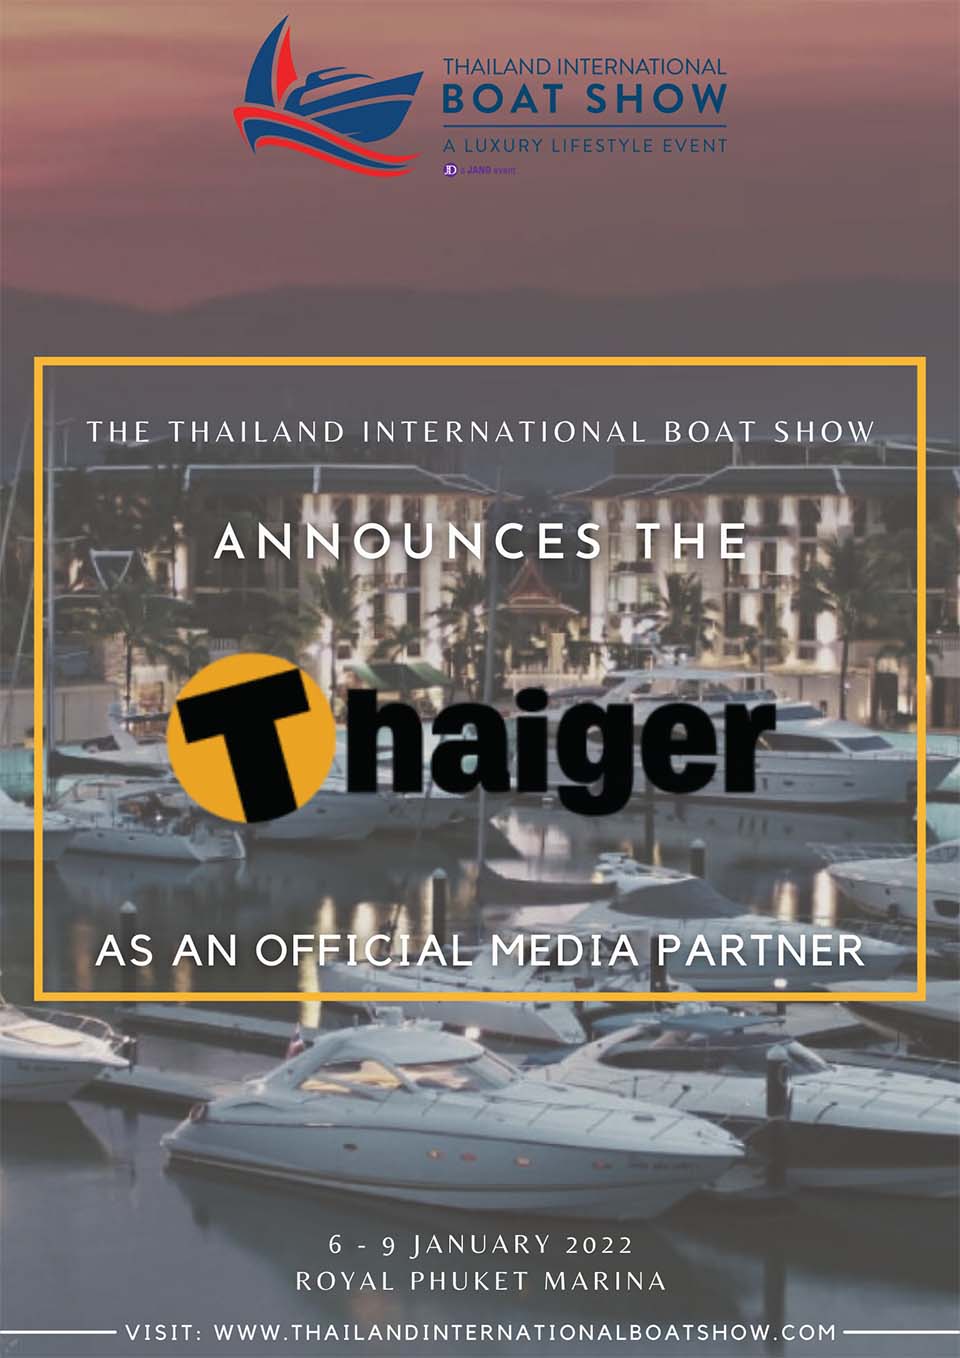 The Thaiger announced as official media partner for The Thailand International Boat Show